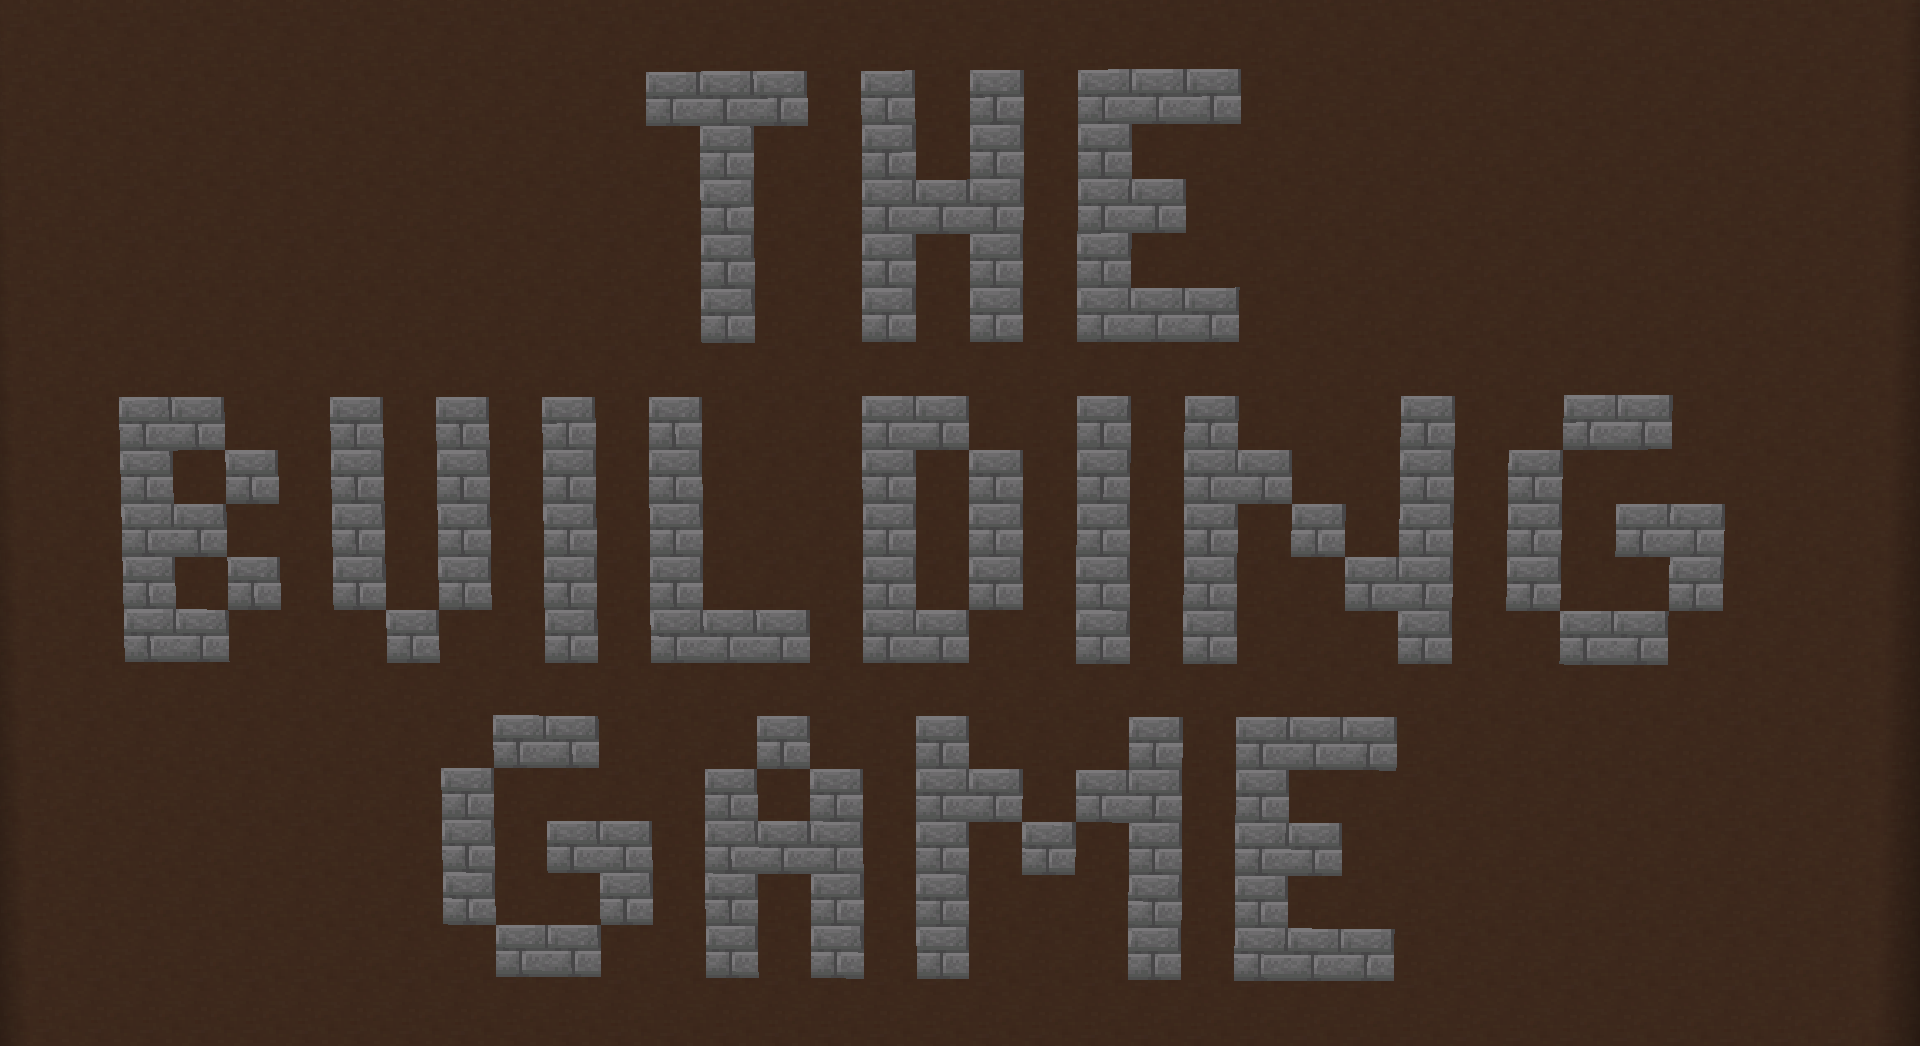 Download The Building Game for 1.16 for Minecraft 1.16.4